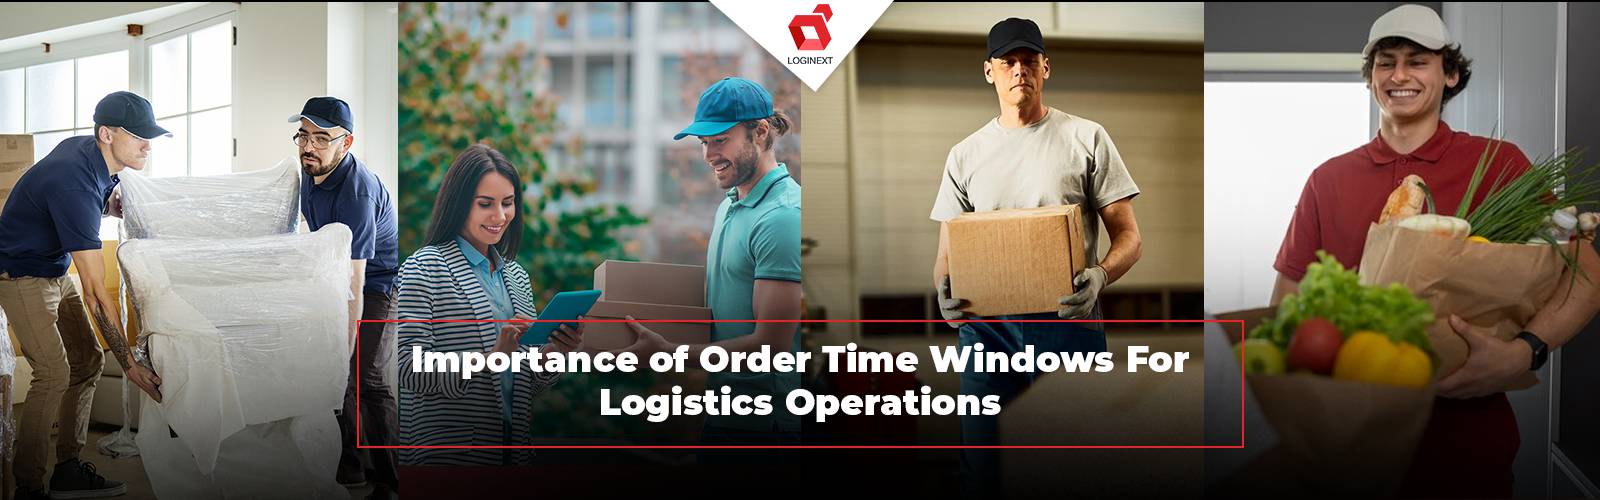 Importance of Order Time Windows For Delivery and Logistics Operations in Retail, eCommerce, CPG, CEP, Transportation and Logistics